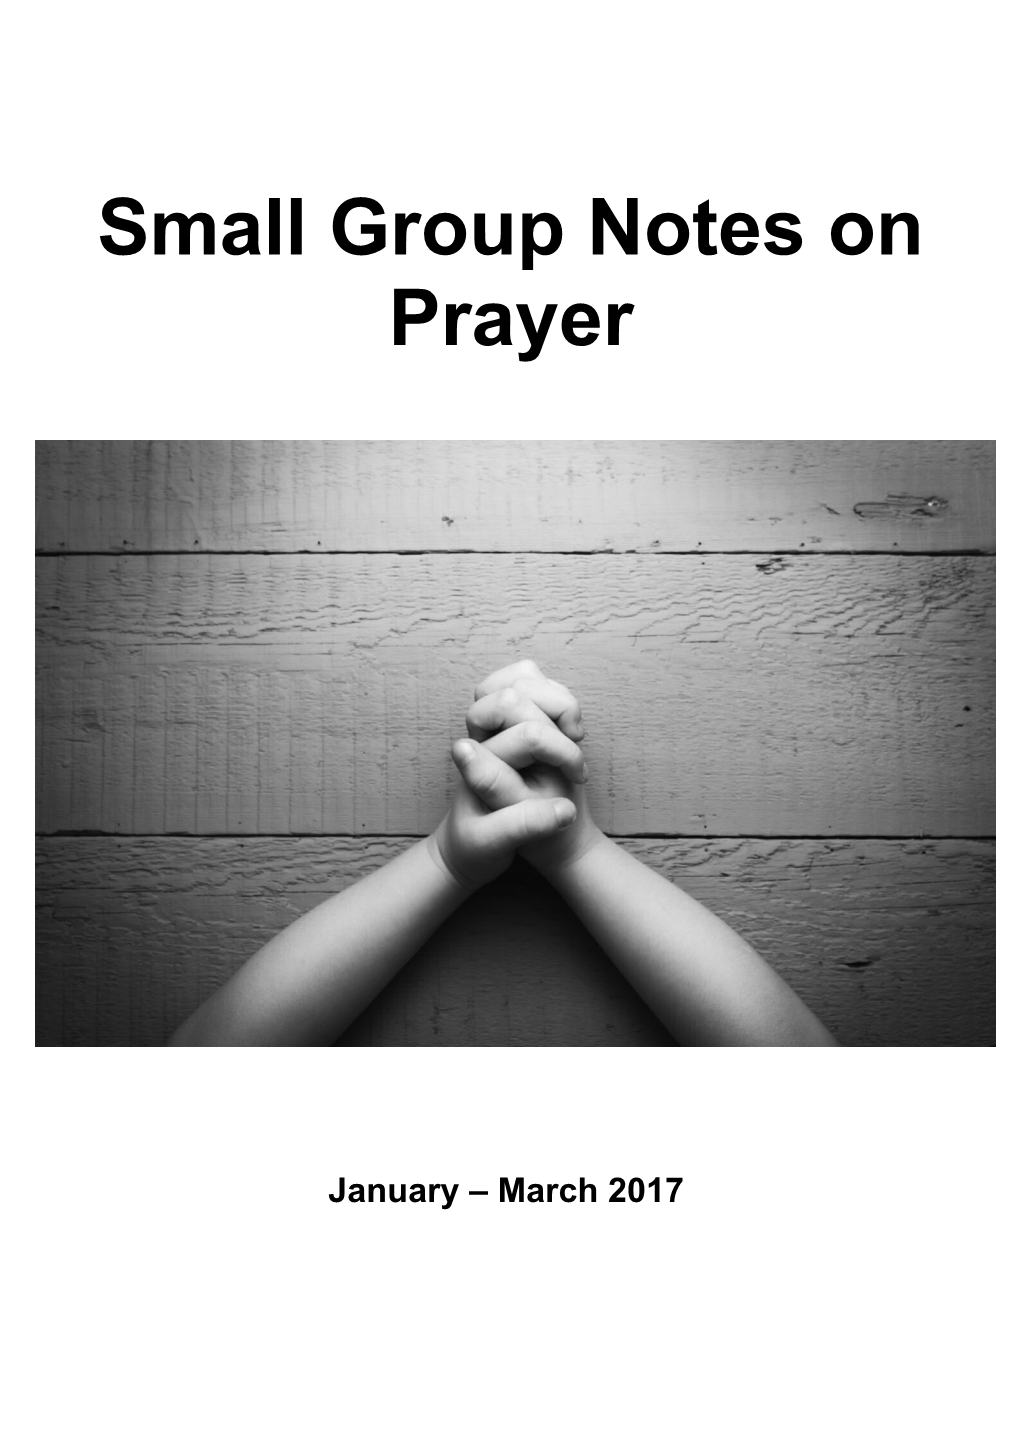 Small Group Notes on Prayer